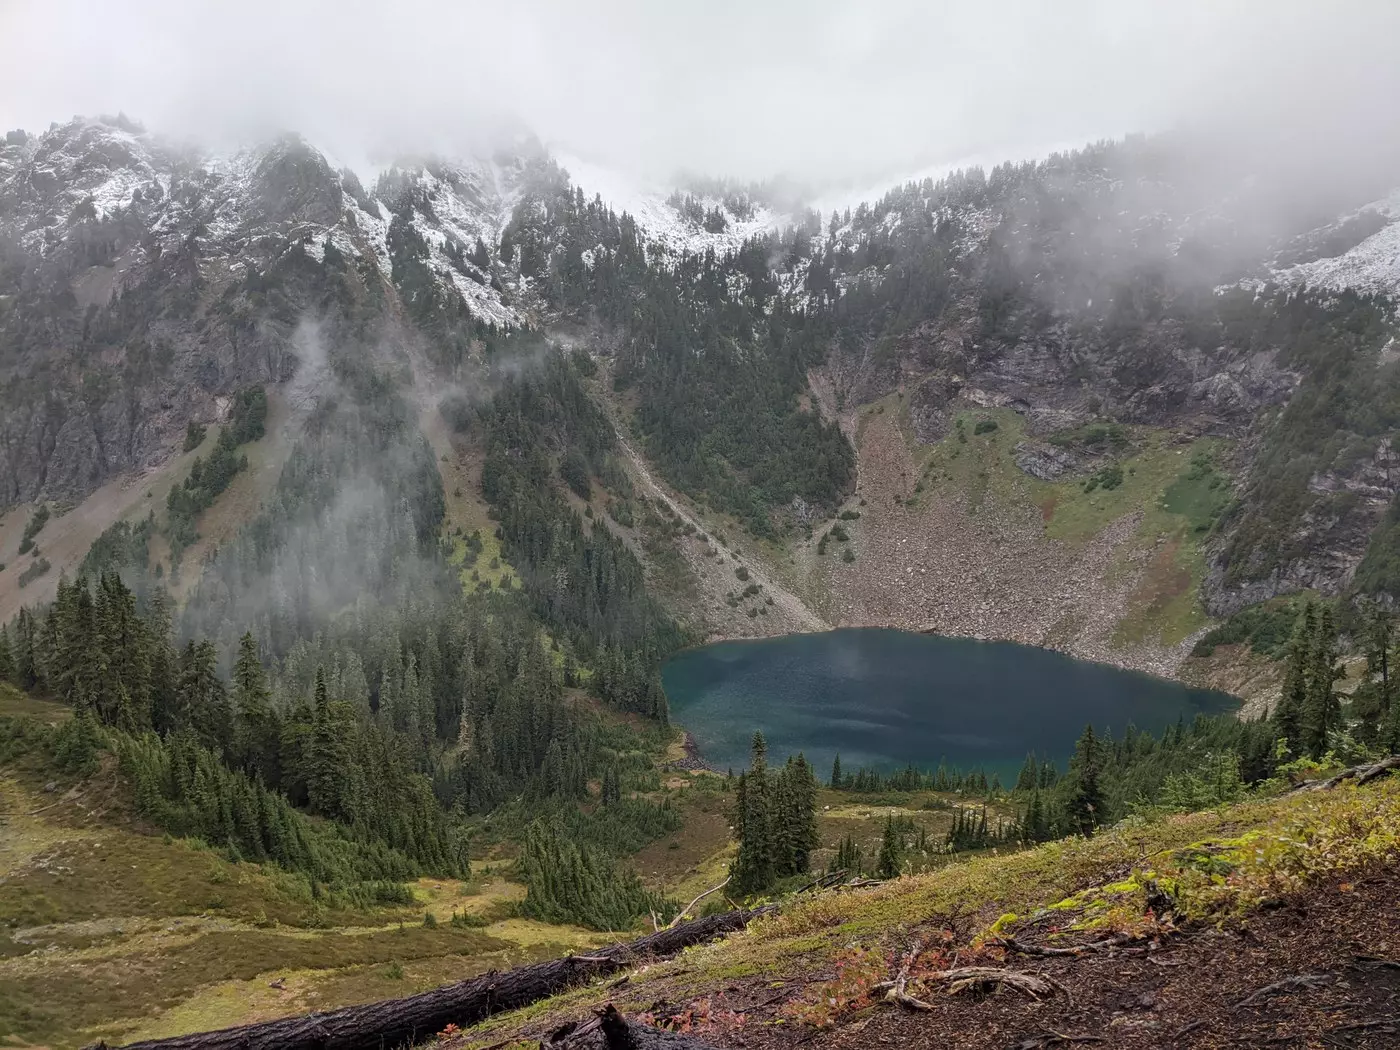 A small blue lake surrounded by steep gray mountains.